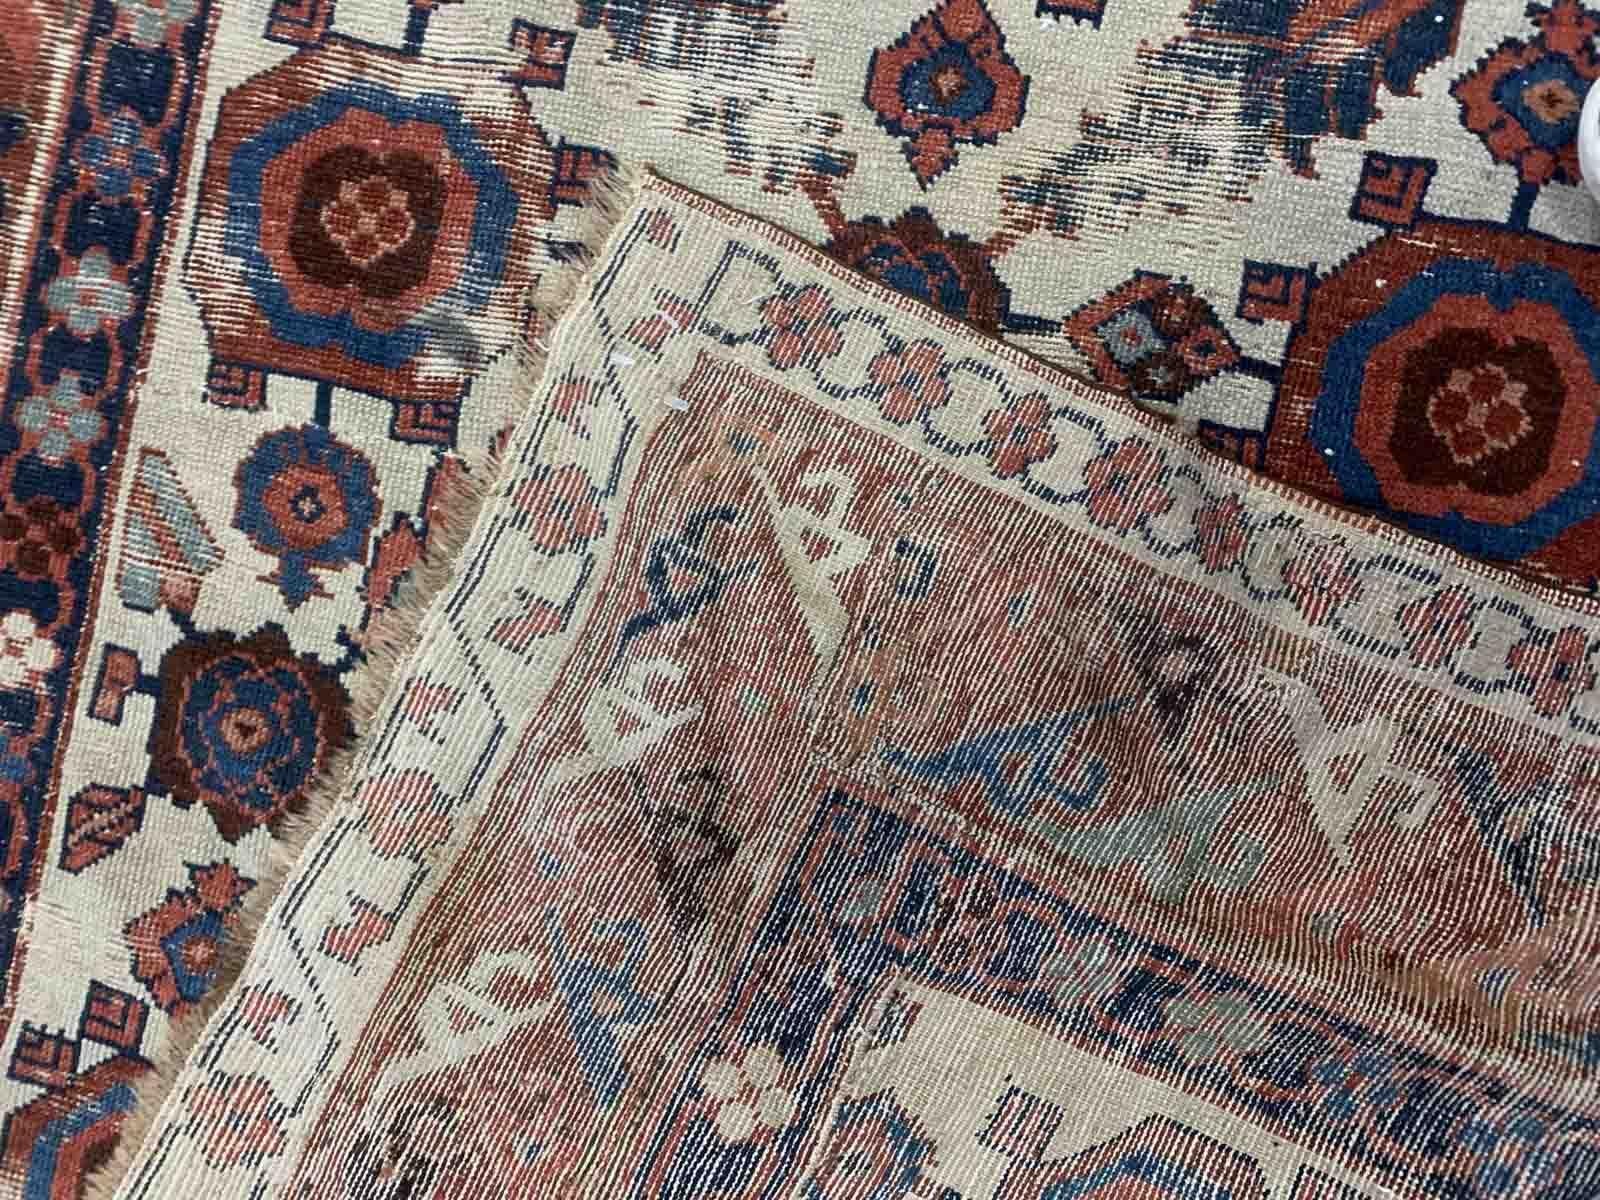 Very old handmade antique North-West Persian rug in white and red background colors. The rug is from the beginning of 19th century in distressed condition. 

-Condition: distressed,

-Circa: 1820s,

-Size: 3.11' x 8' (125cm x